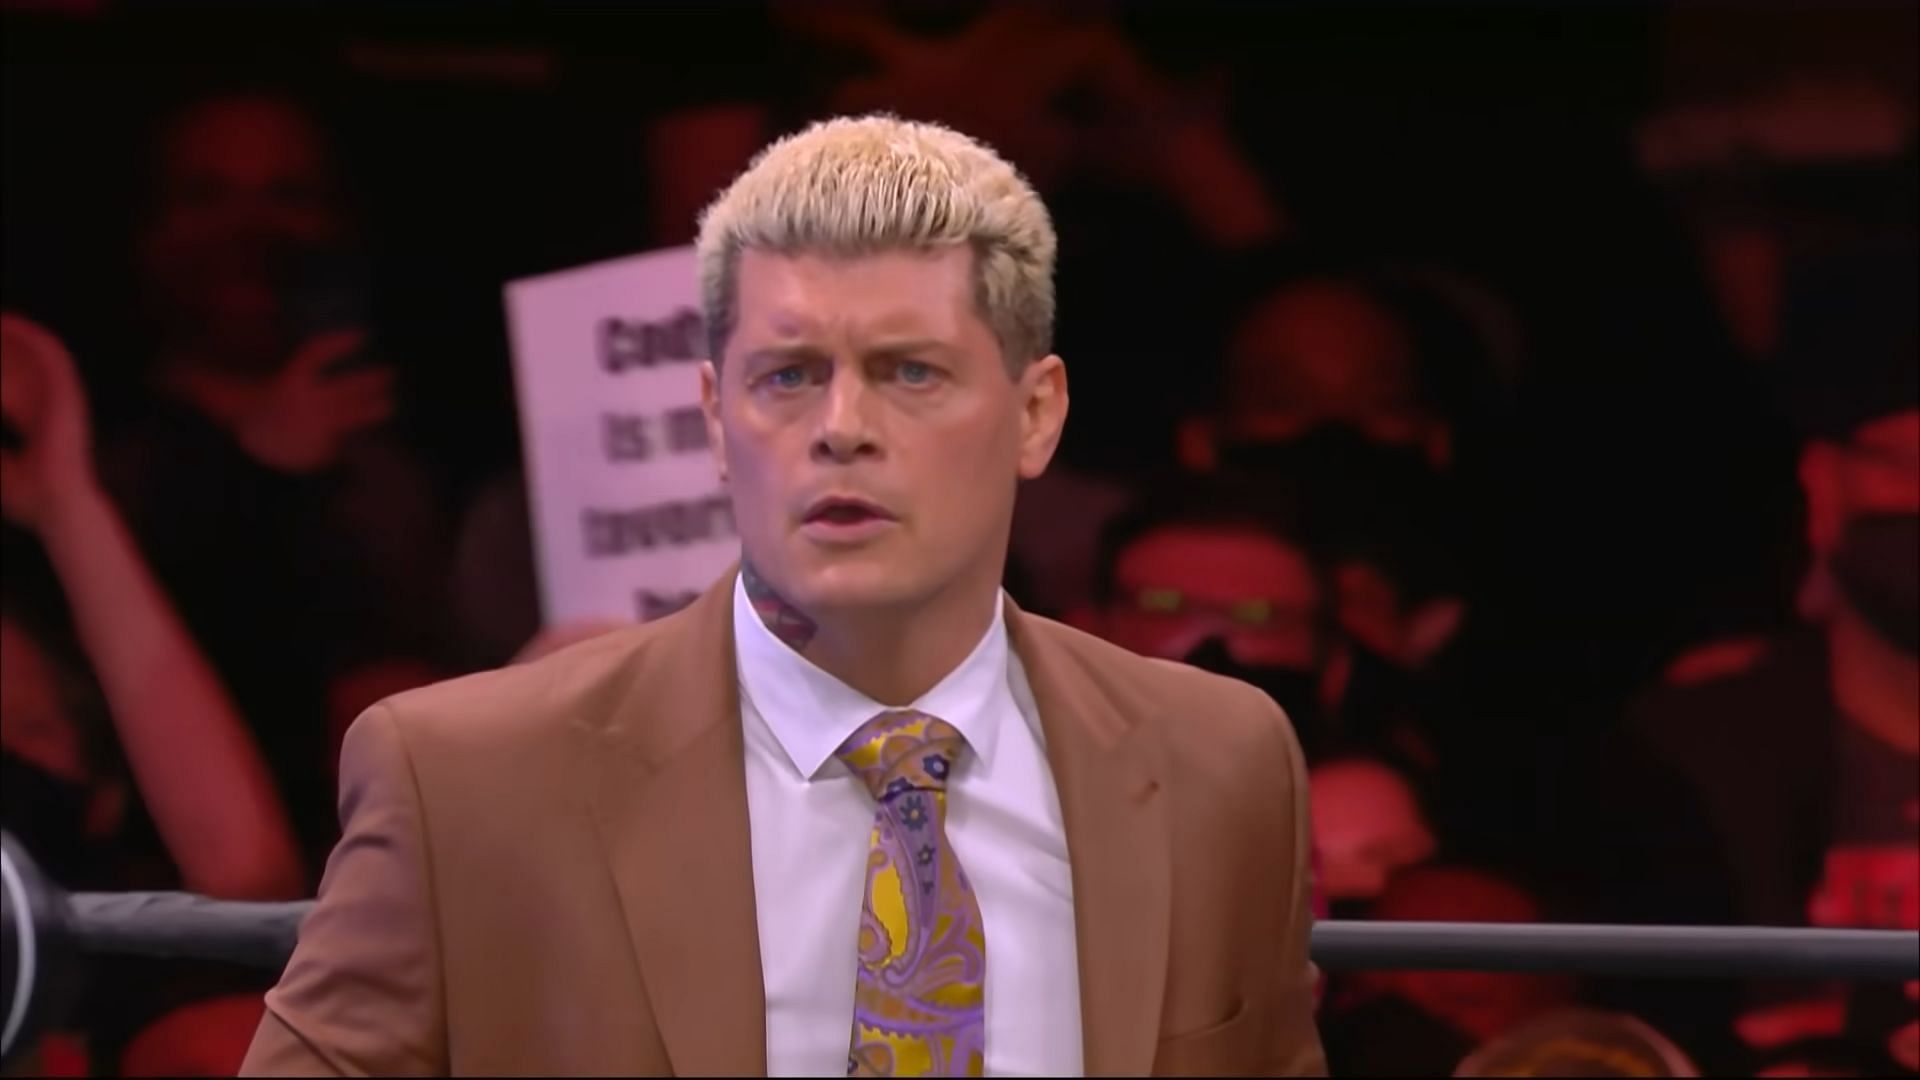 Cody Rhodes is known to extend his generosity to a major AEW personality on his birthday